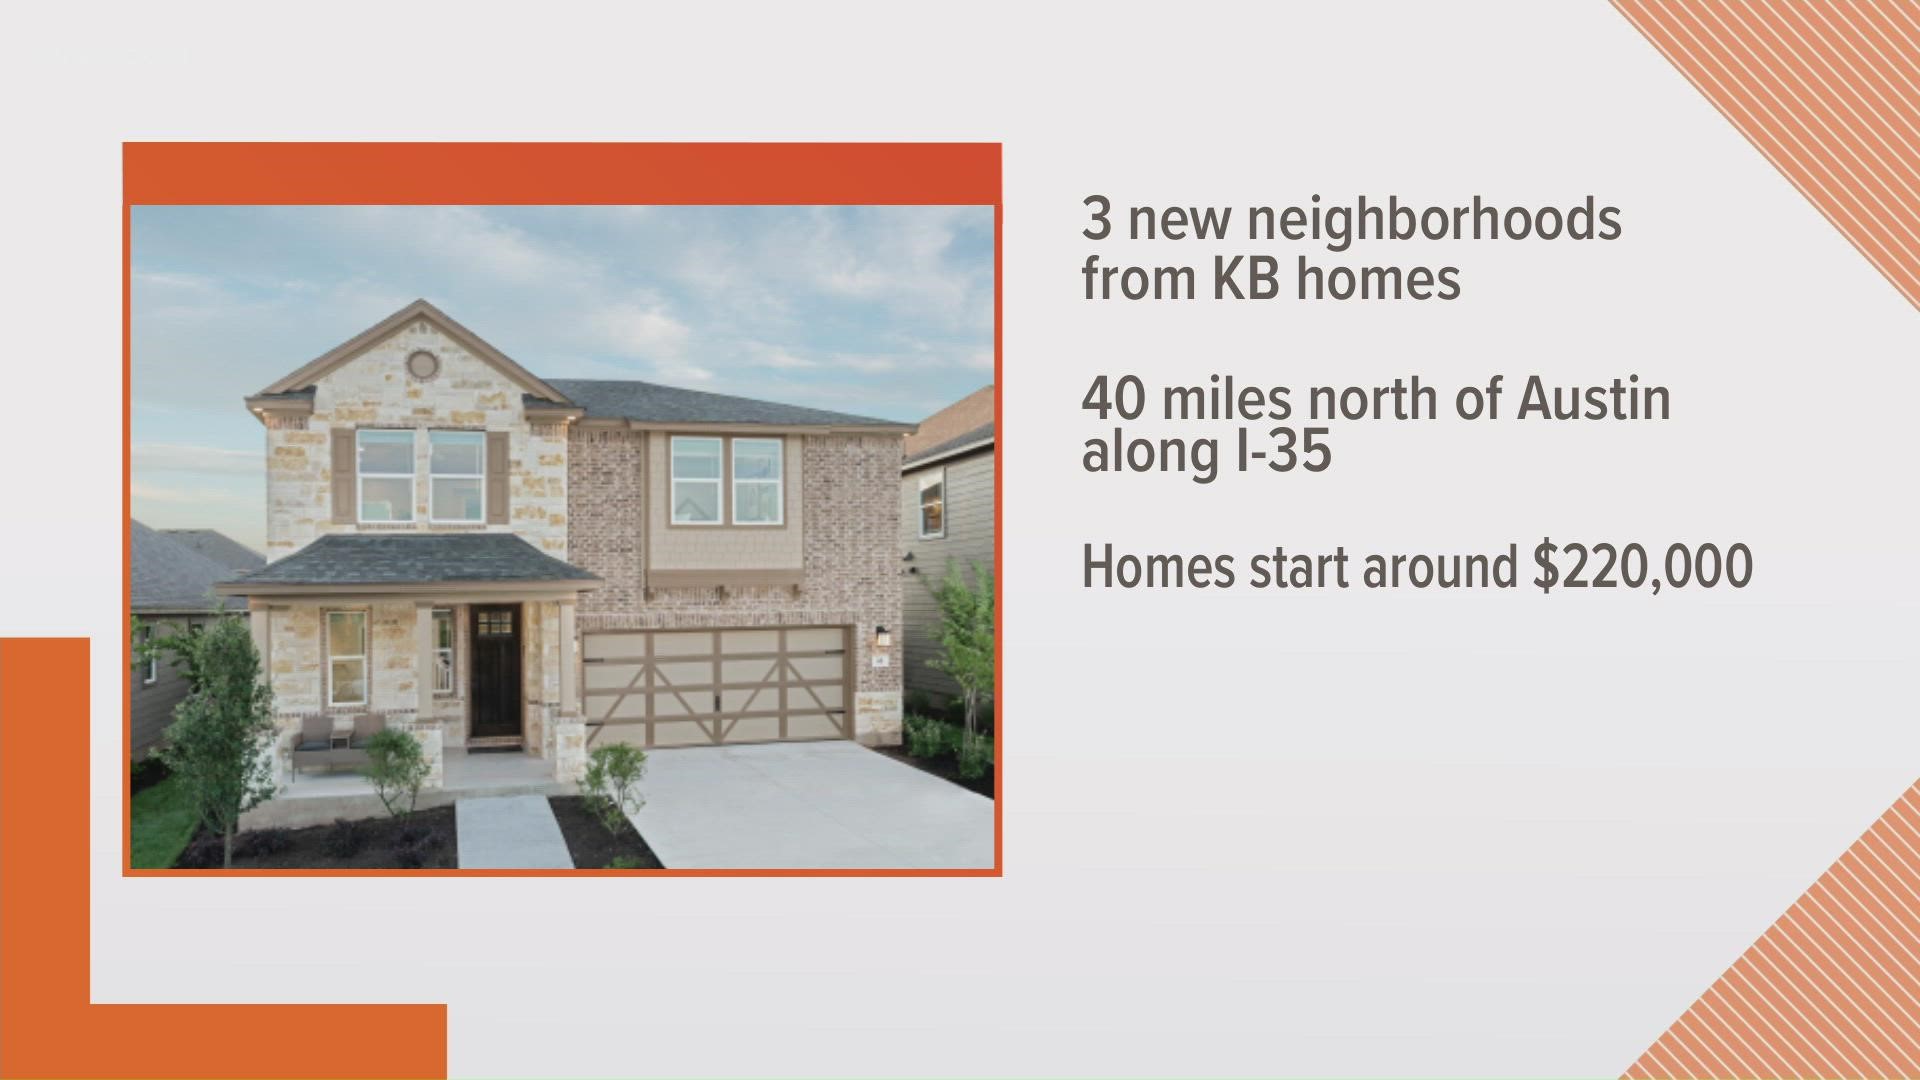 KB Home announced it will open three new communities in the Jarrell area.